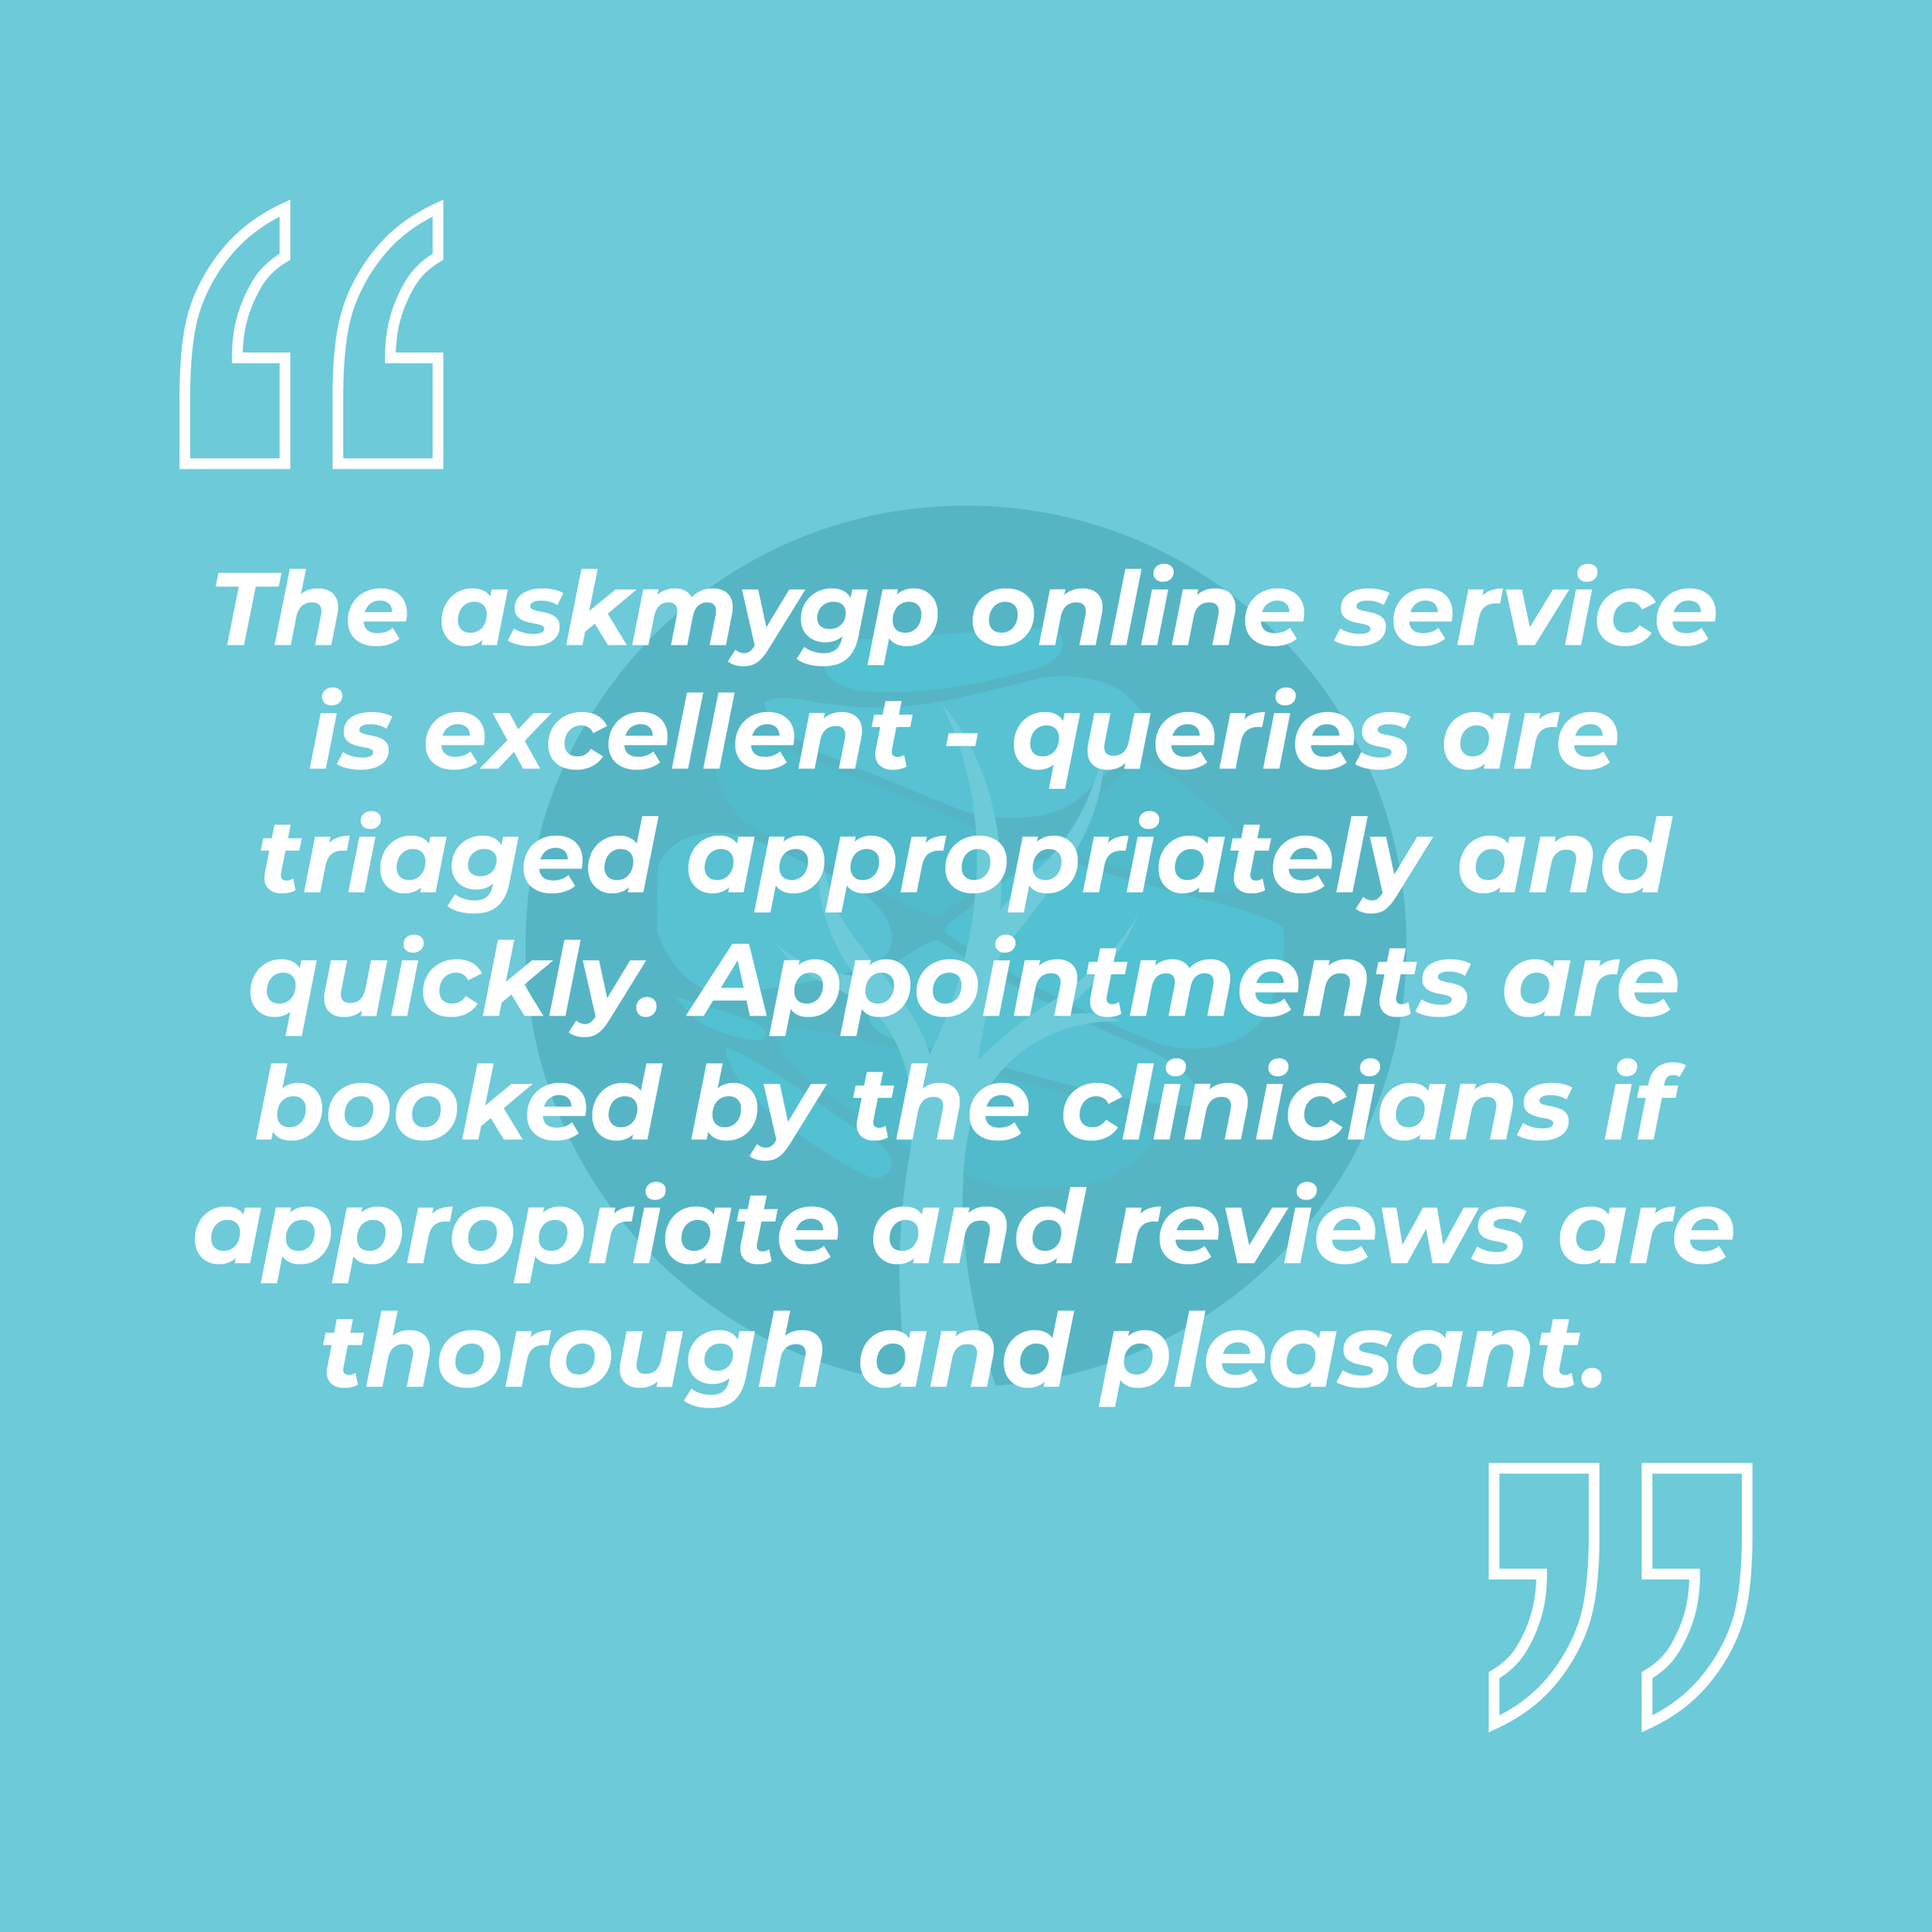 The askmygp online service is excellent - queries are triaged appropriately and quickly. Appointments are booked by the clinicians if appropriate and reviews are thorough and pleasant.